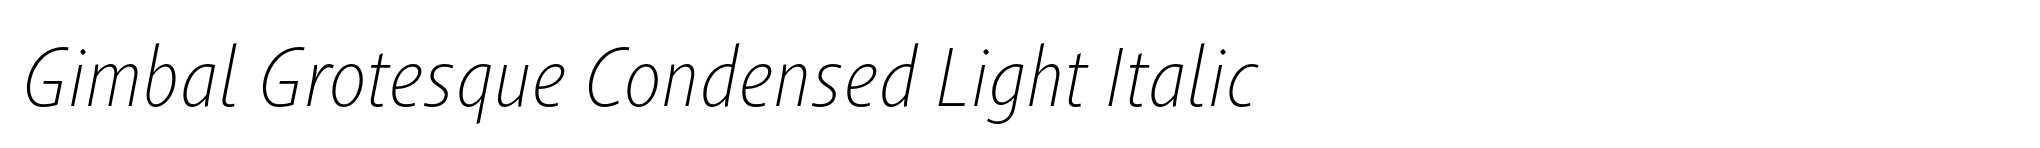 Gimbal Grotesque Condensed Light Italic image